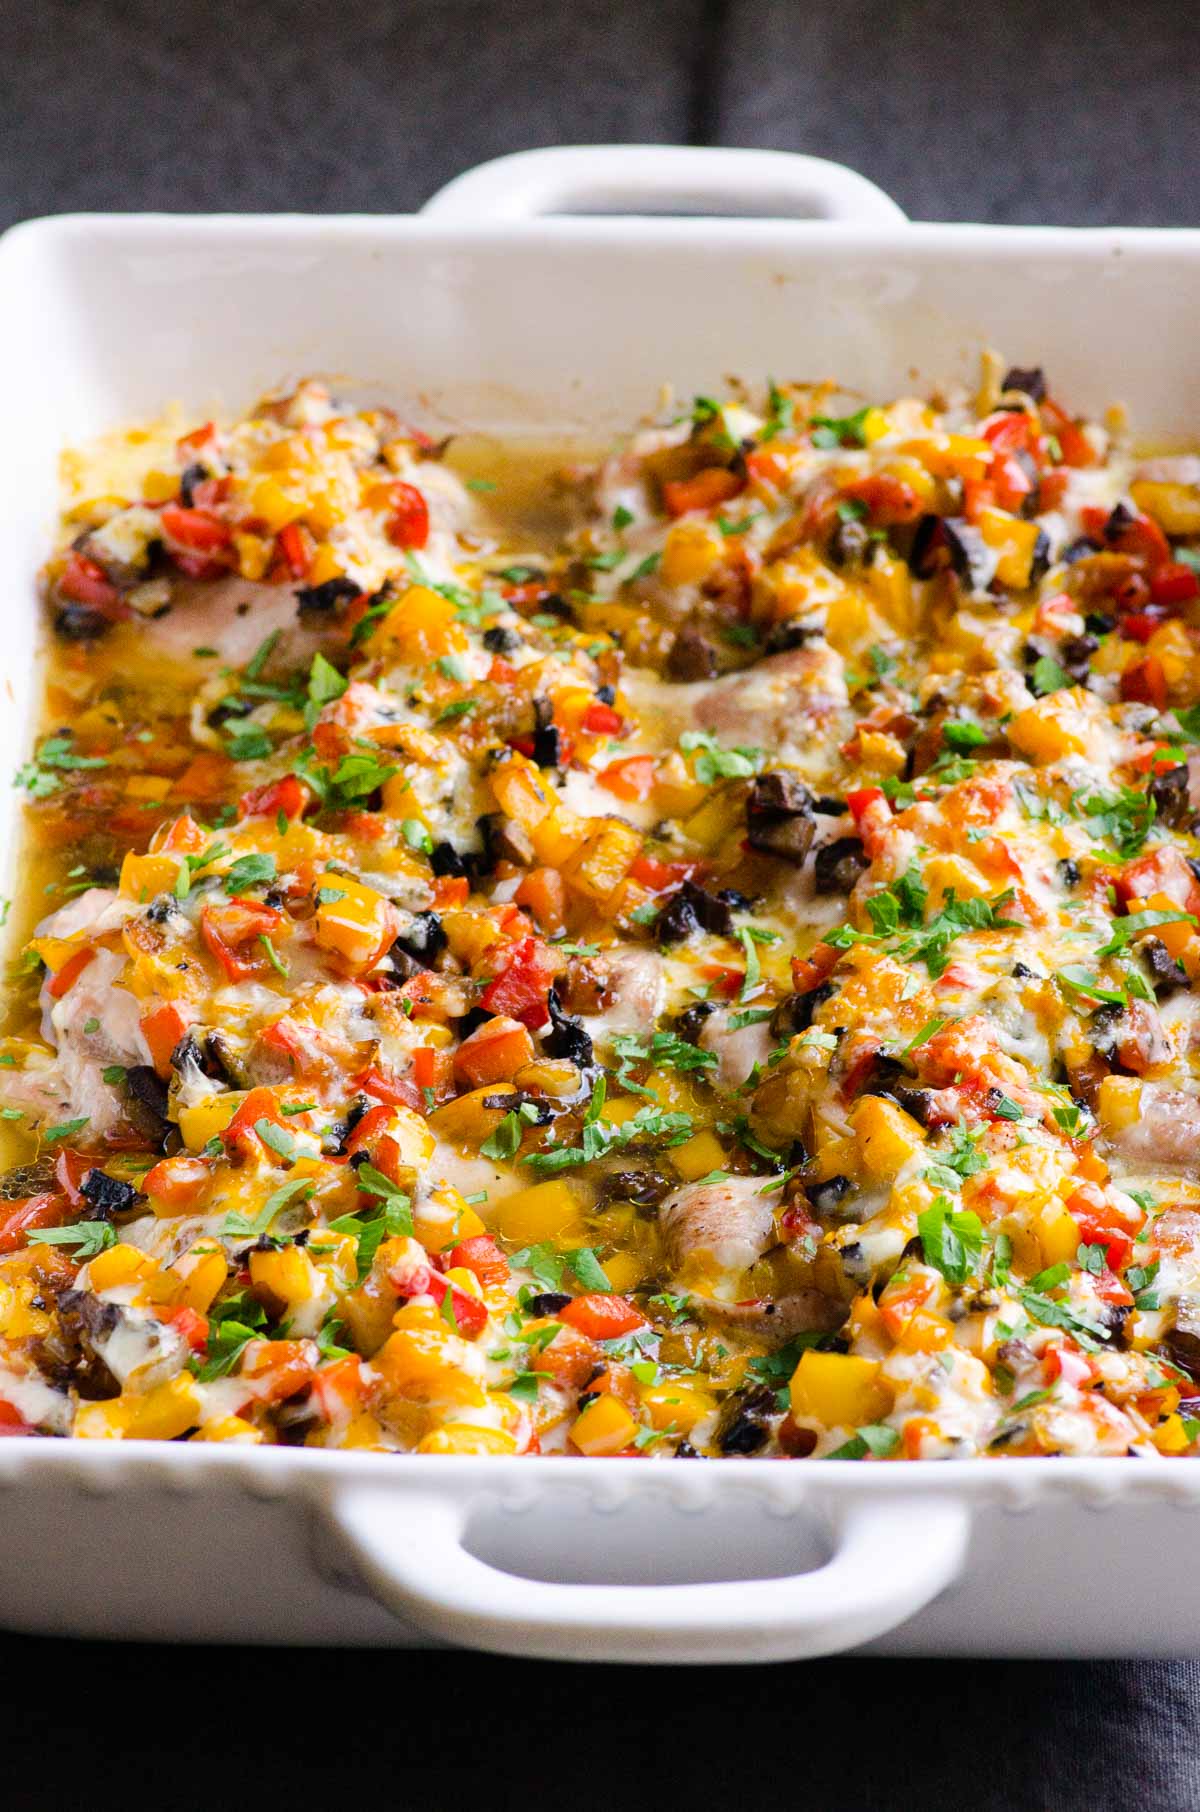 Baked chicken and peppers in white baking dish.